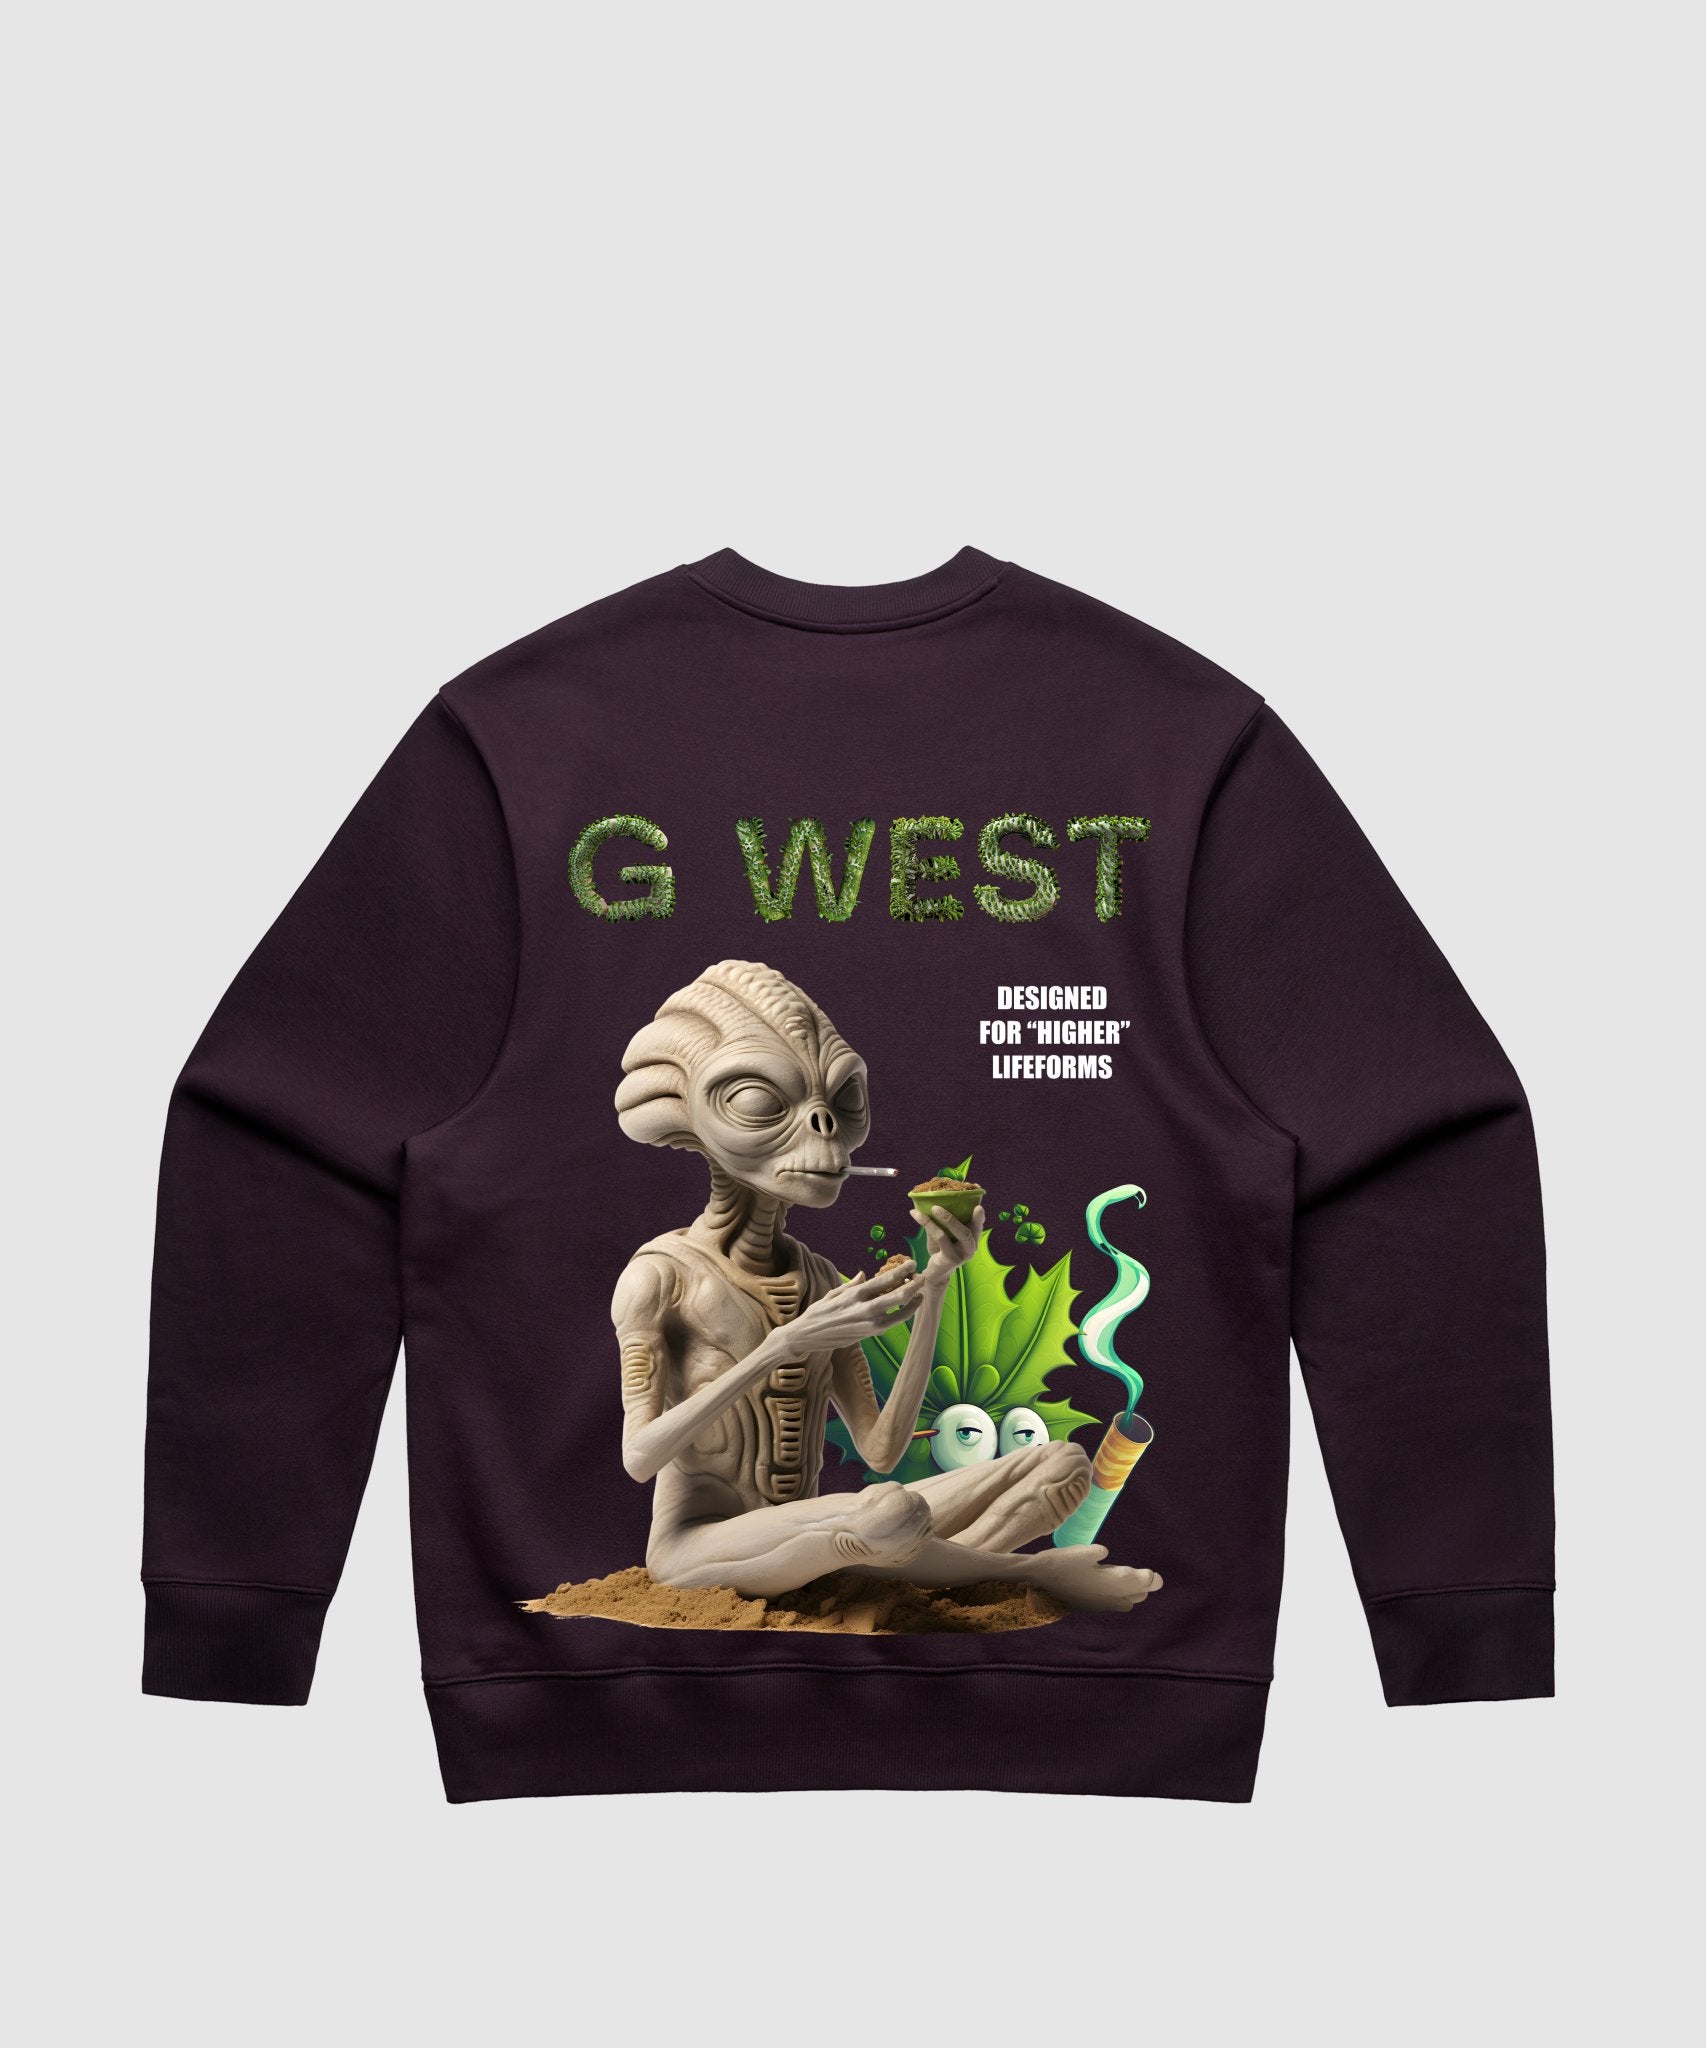 G WEST HIGHER LIFEFROM HEAVY PREMIUM CREWNECK - 6 COLORS - G West